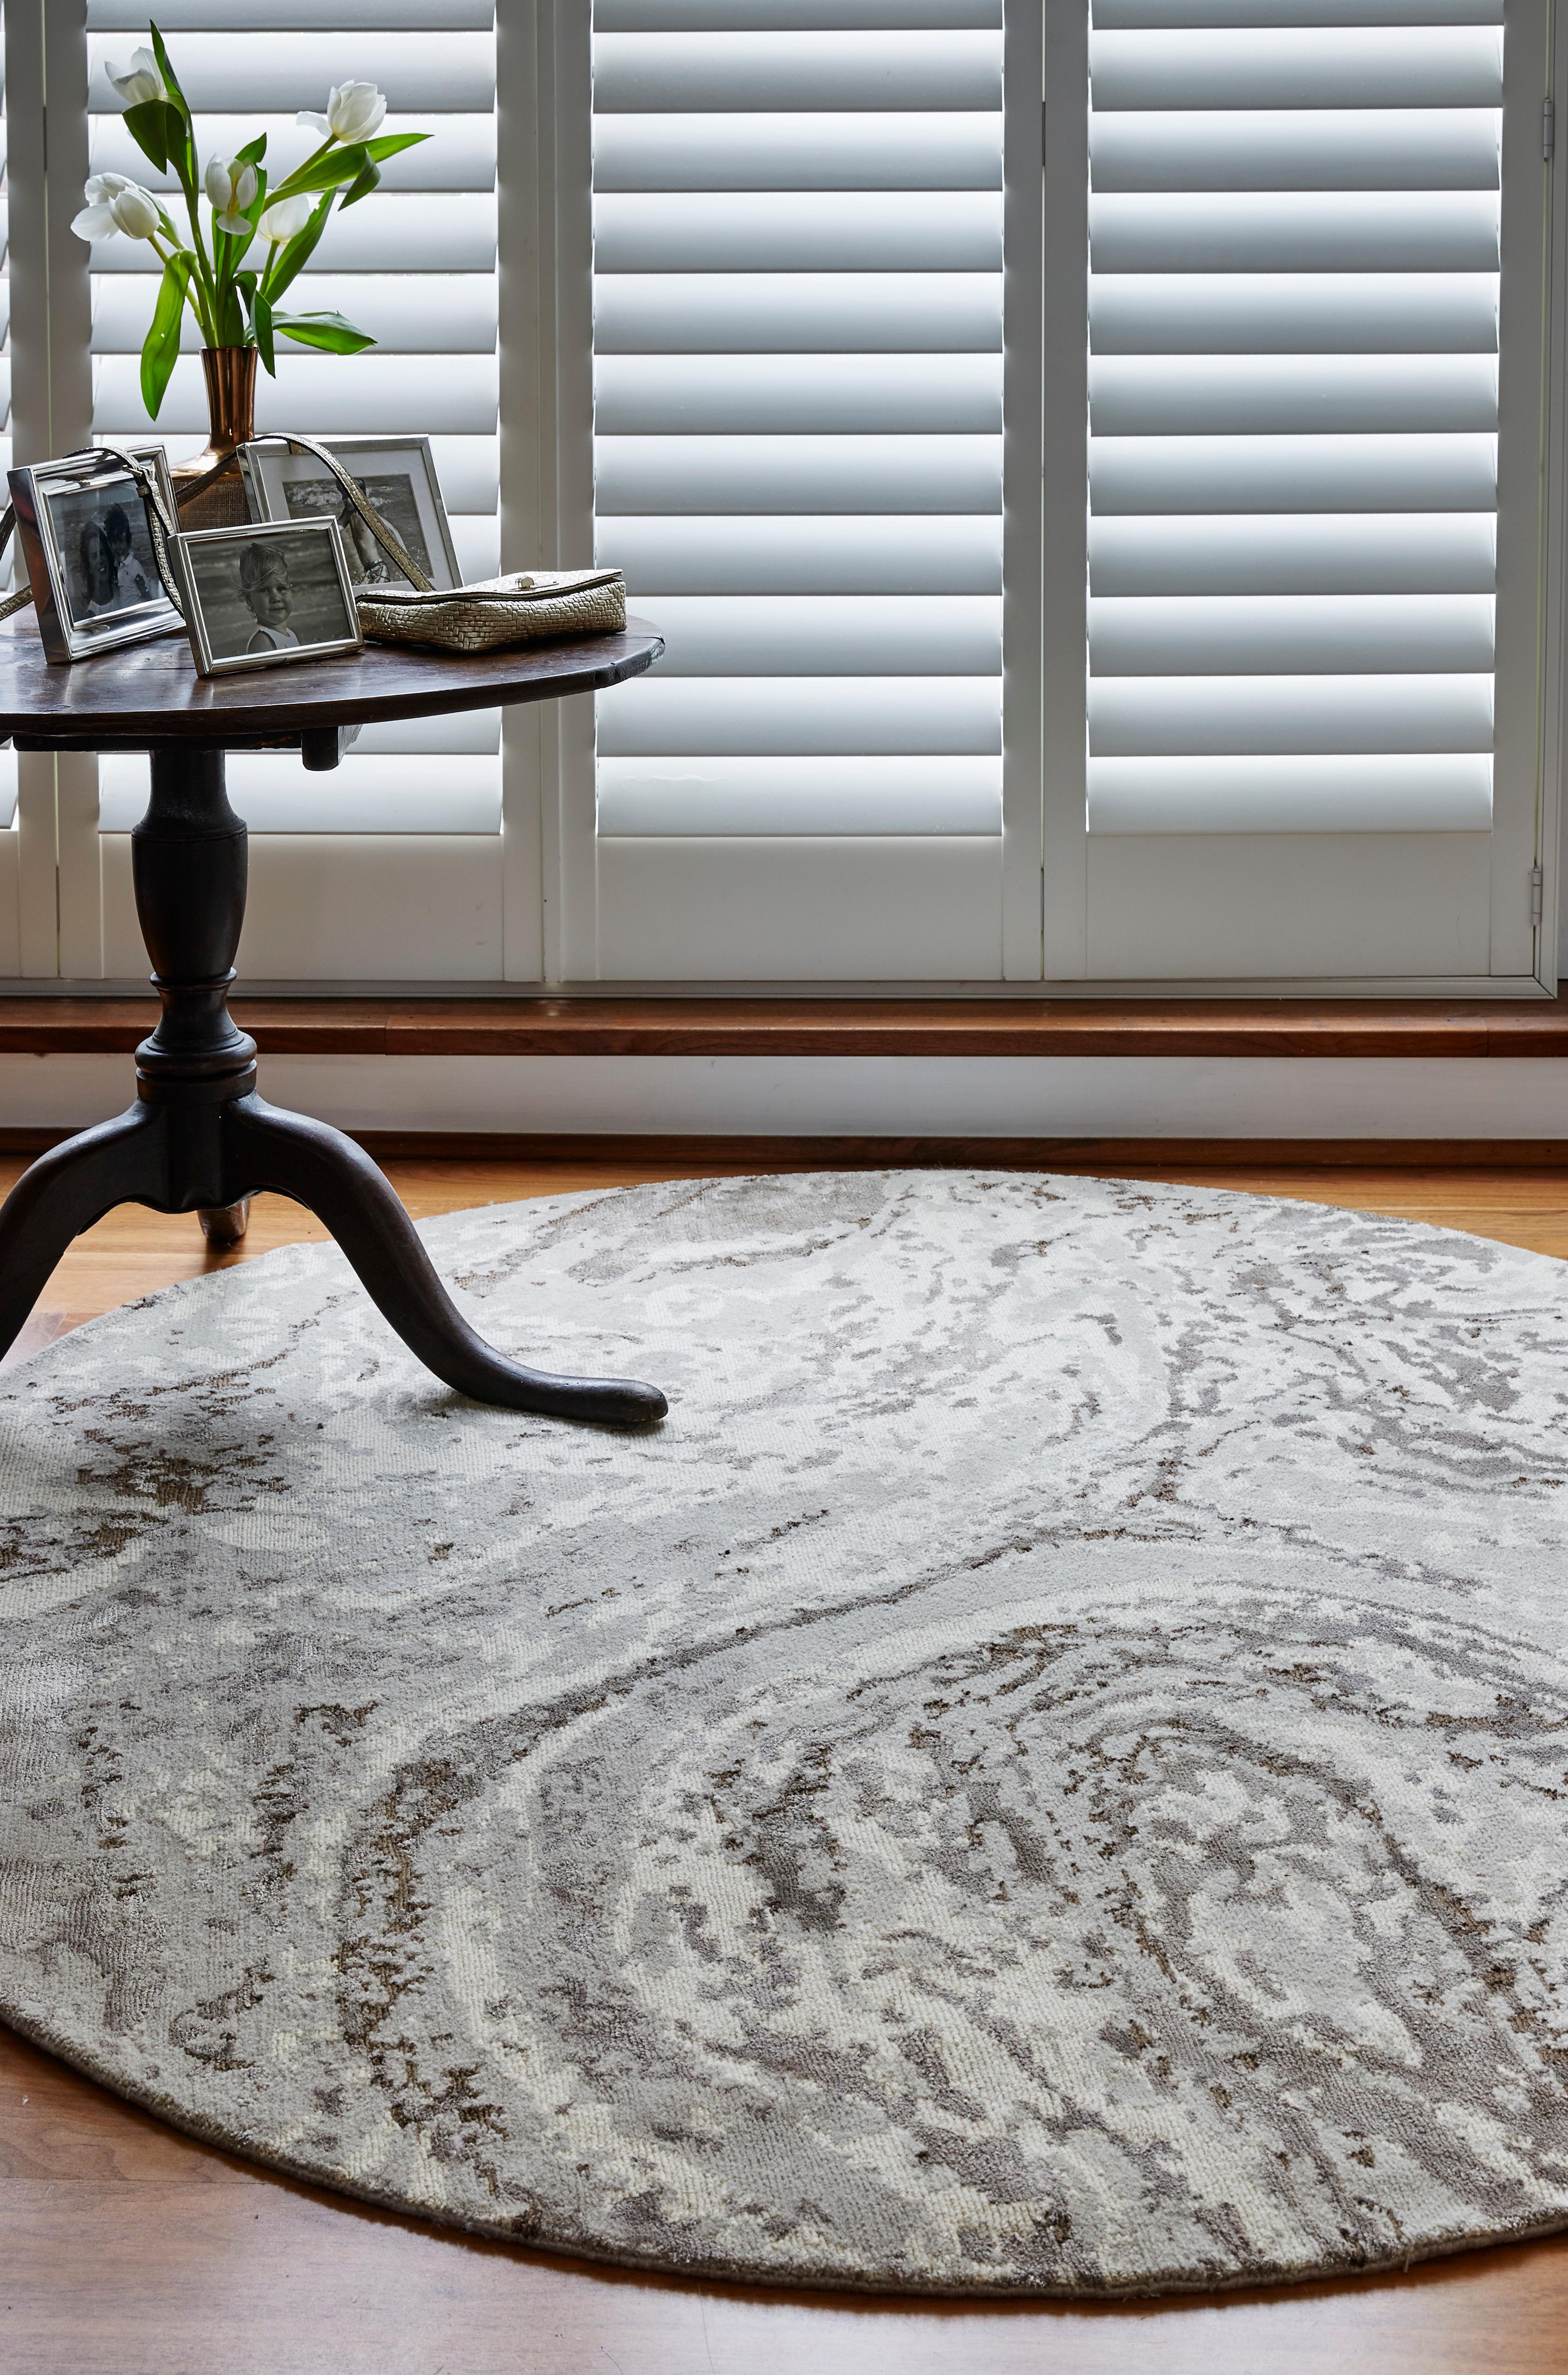 The fluid patterns found in the travertine stone have here been interpreted in soft Himalayan wool and lustrous bamboo silk. Rendered almost entirely in muted colours, the design is illuminated by metallic flecks of bronze and silver that are sure